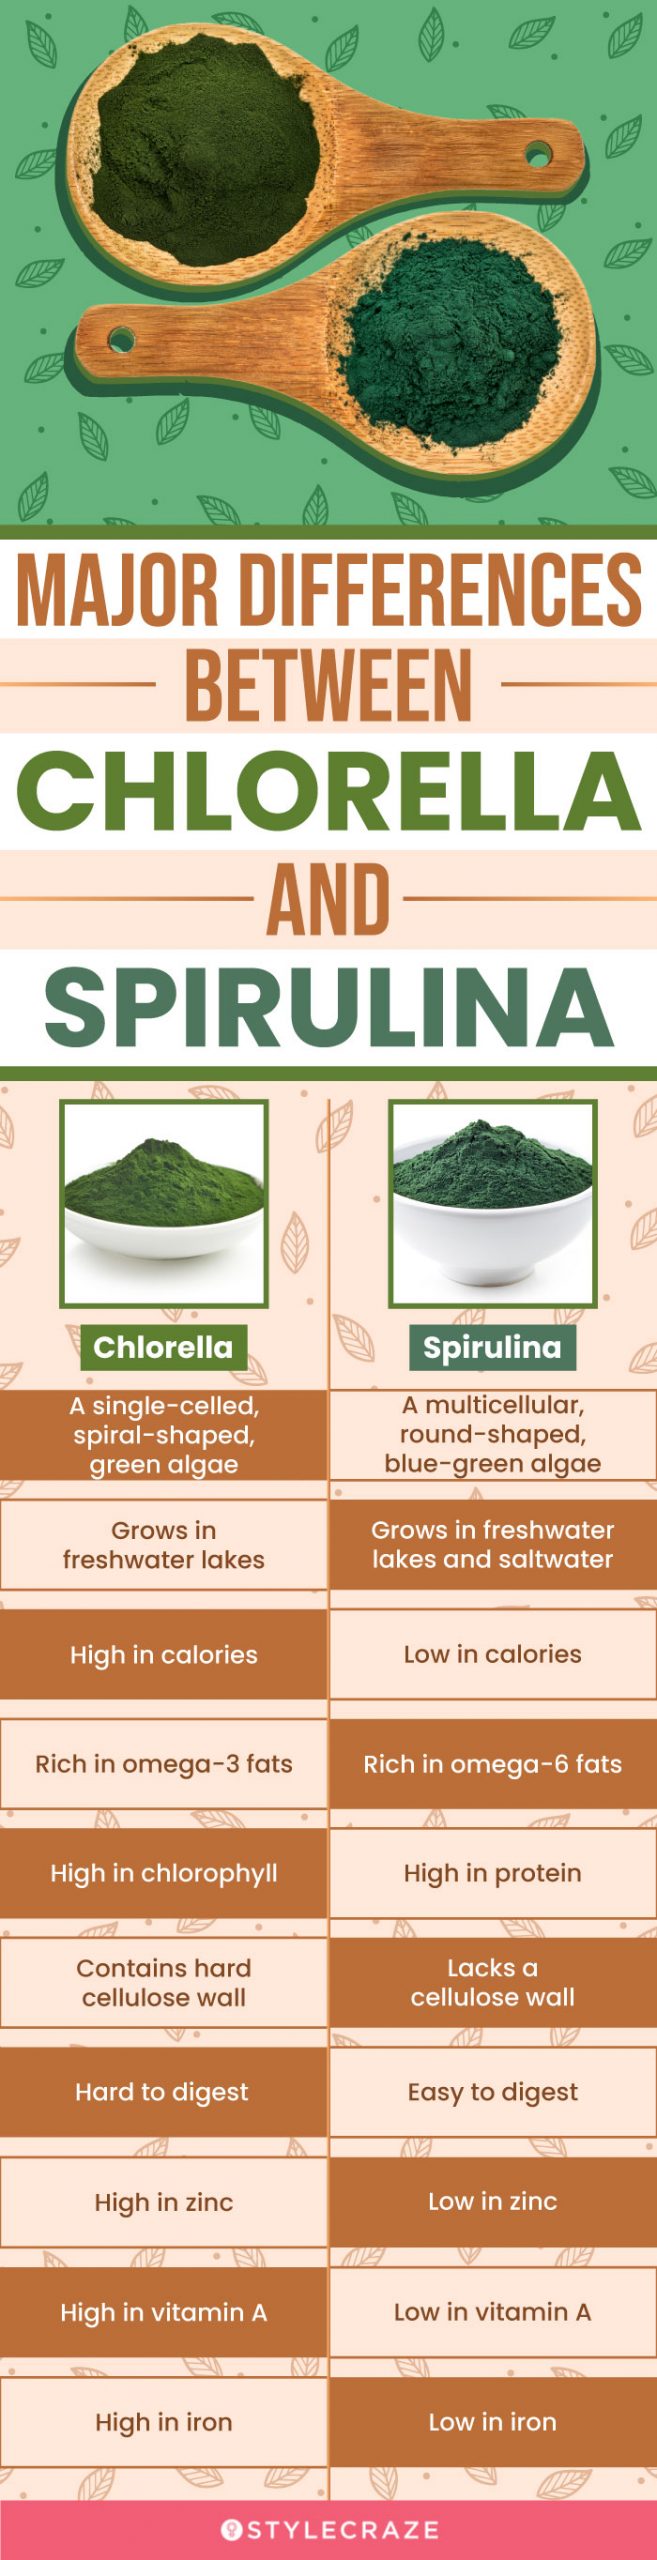 major differences between chlorella and spirulina (infographic)